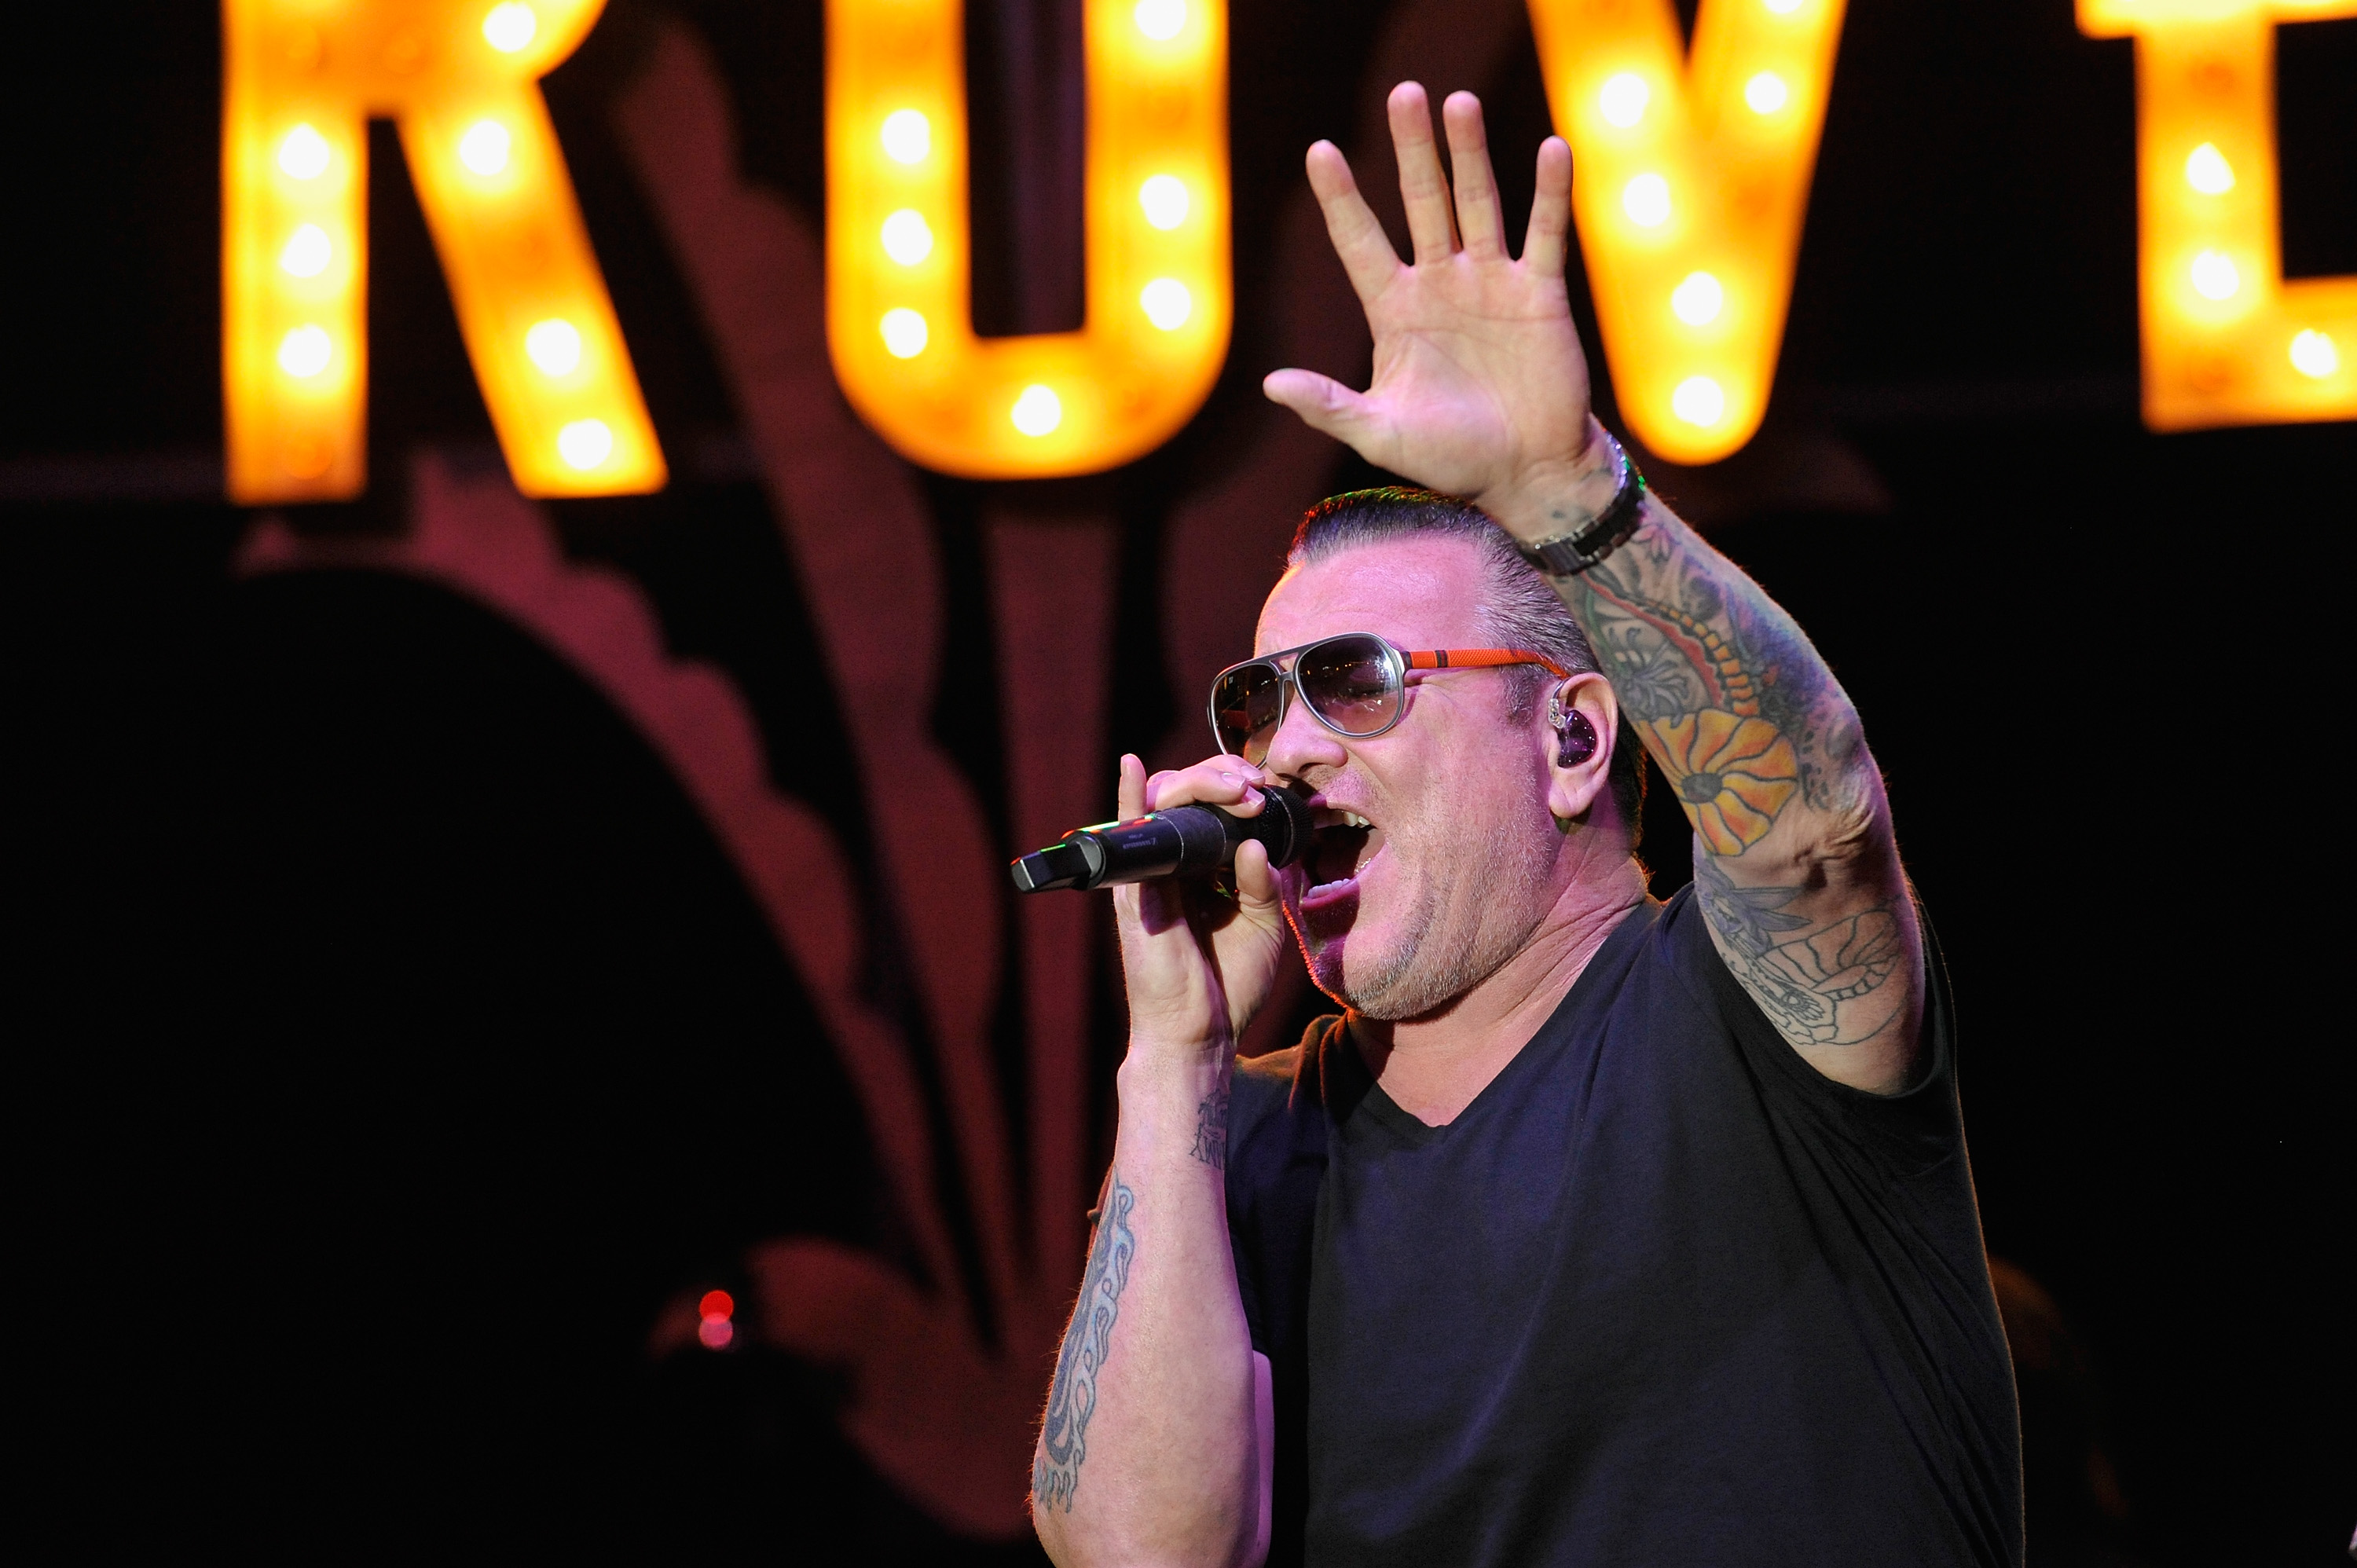 Steve Harwell performing at The Park at The Grove on July 20, 2016, in Los Angeles, California. | Source: Getty Images